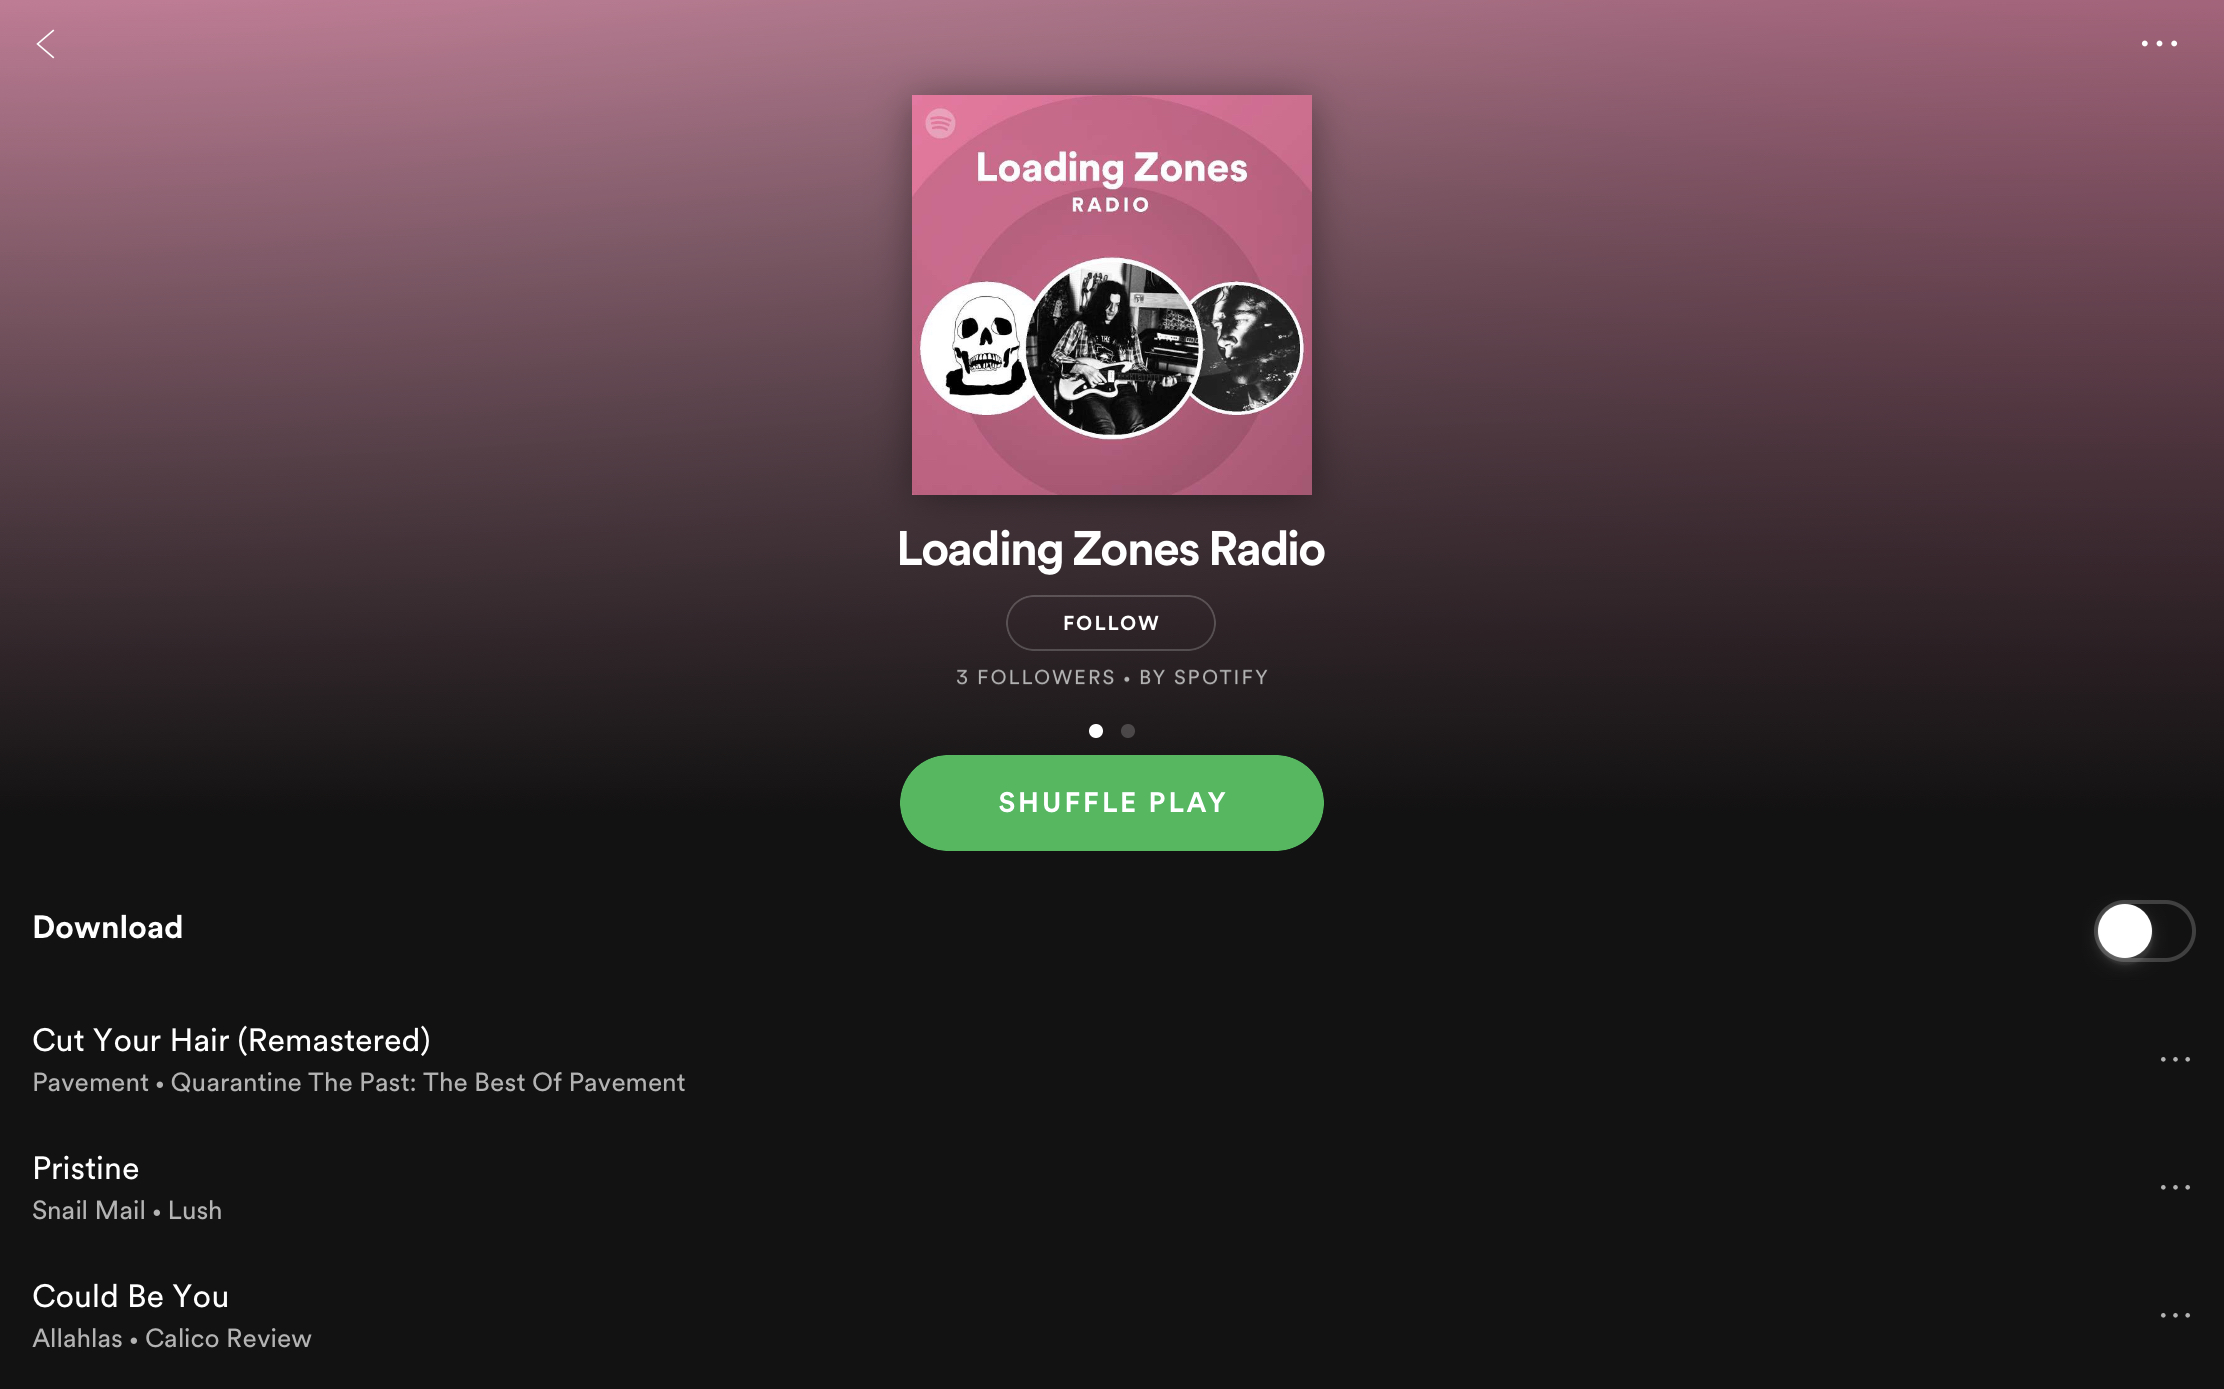 Starting a radio plays song you choose as base - The Spotify Community